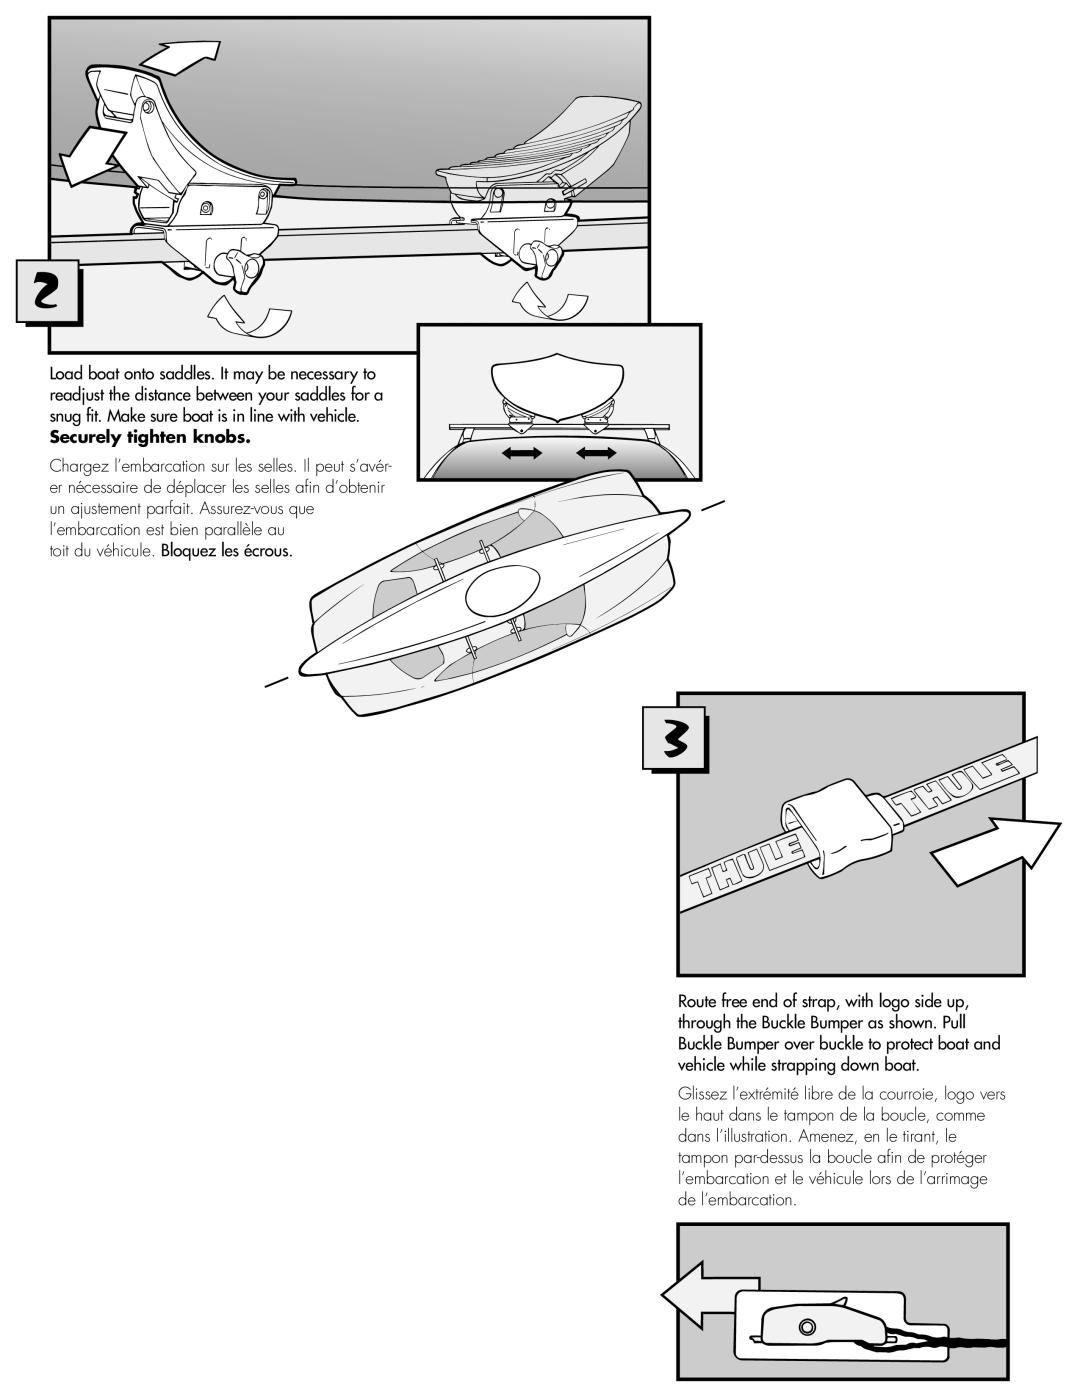 Thule 876 installation instructions Securely tighten knobs 